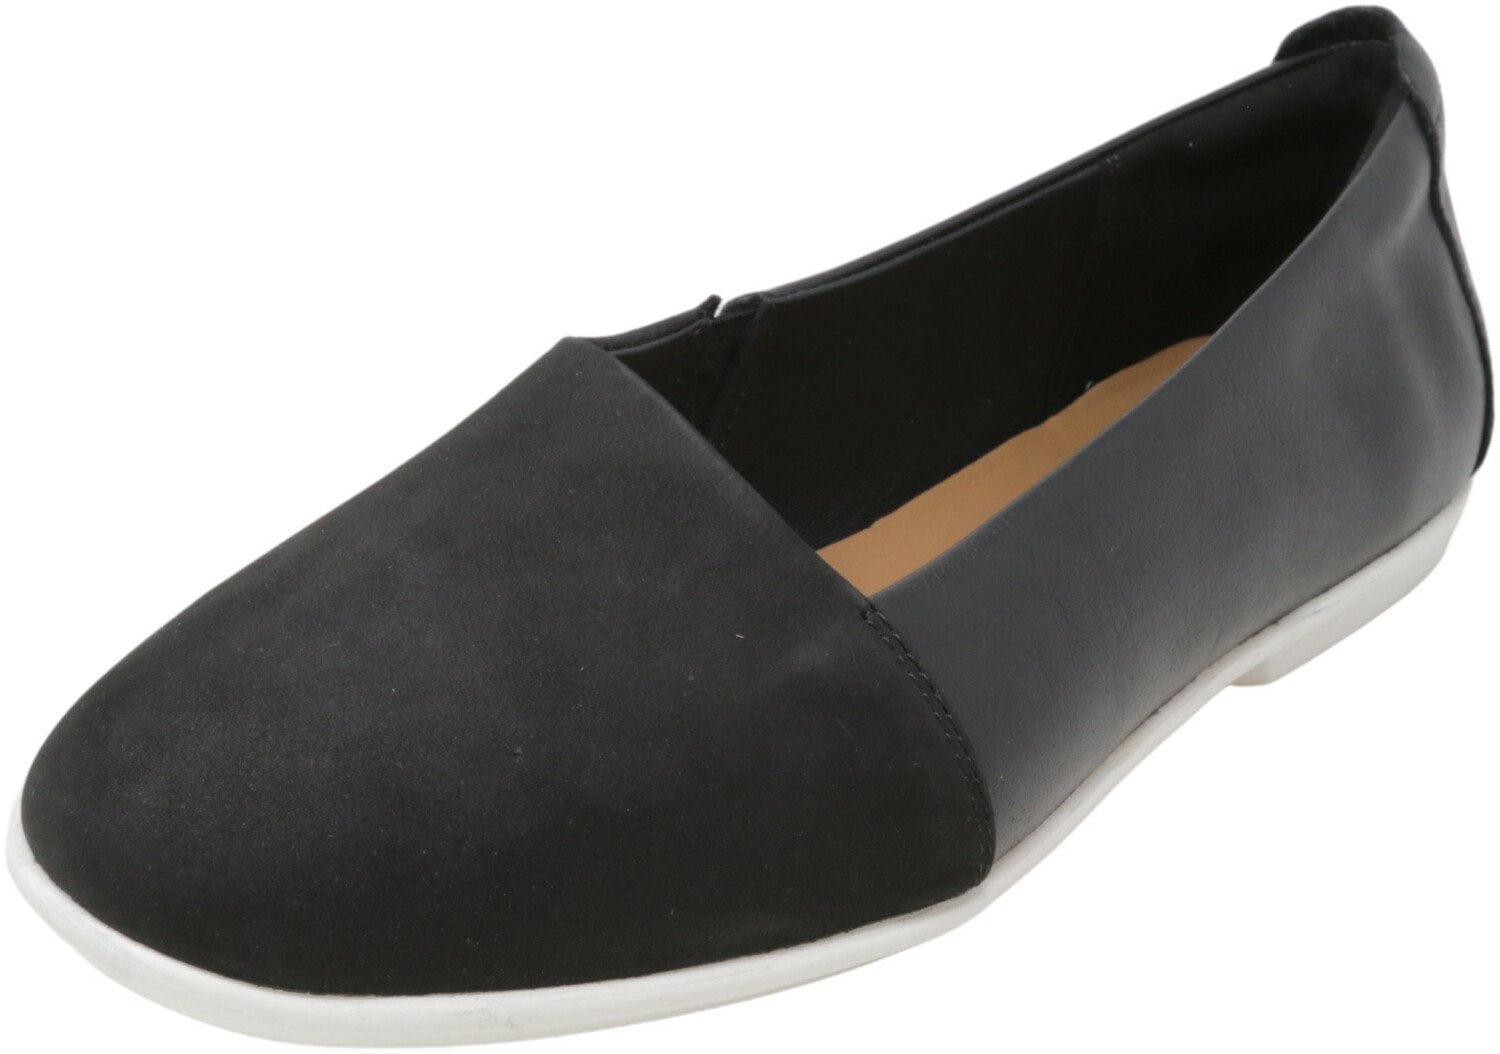 clarks women's leather flats